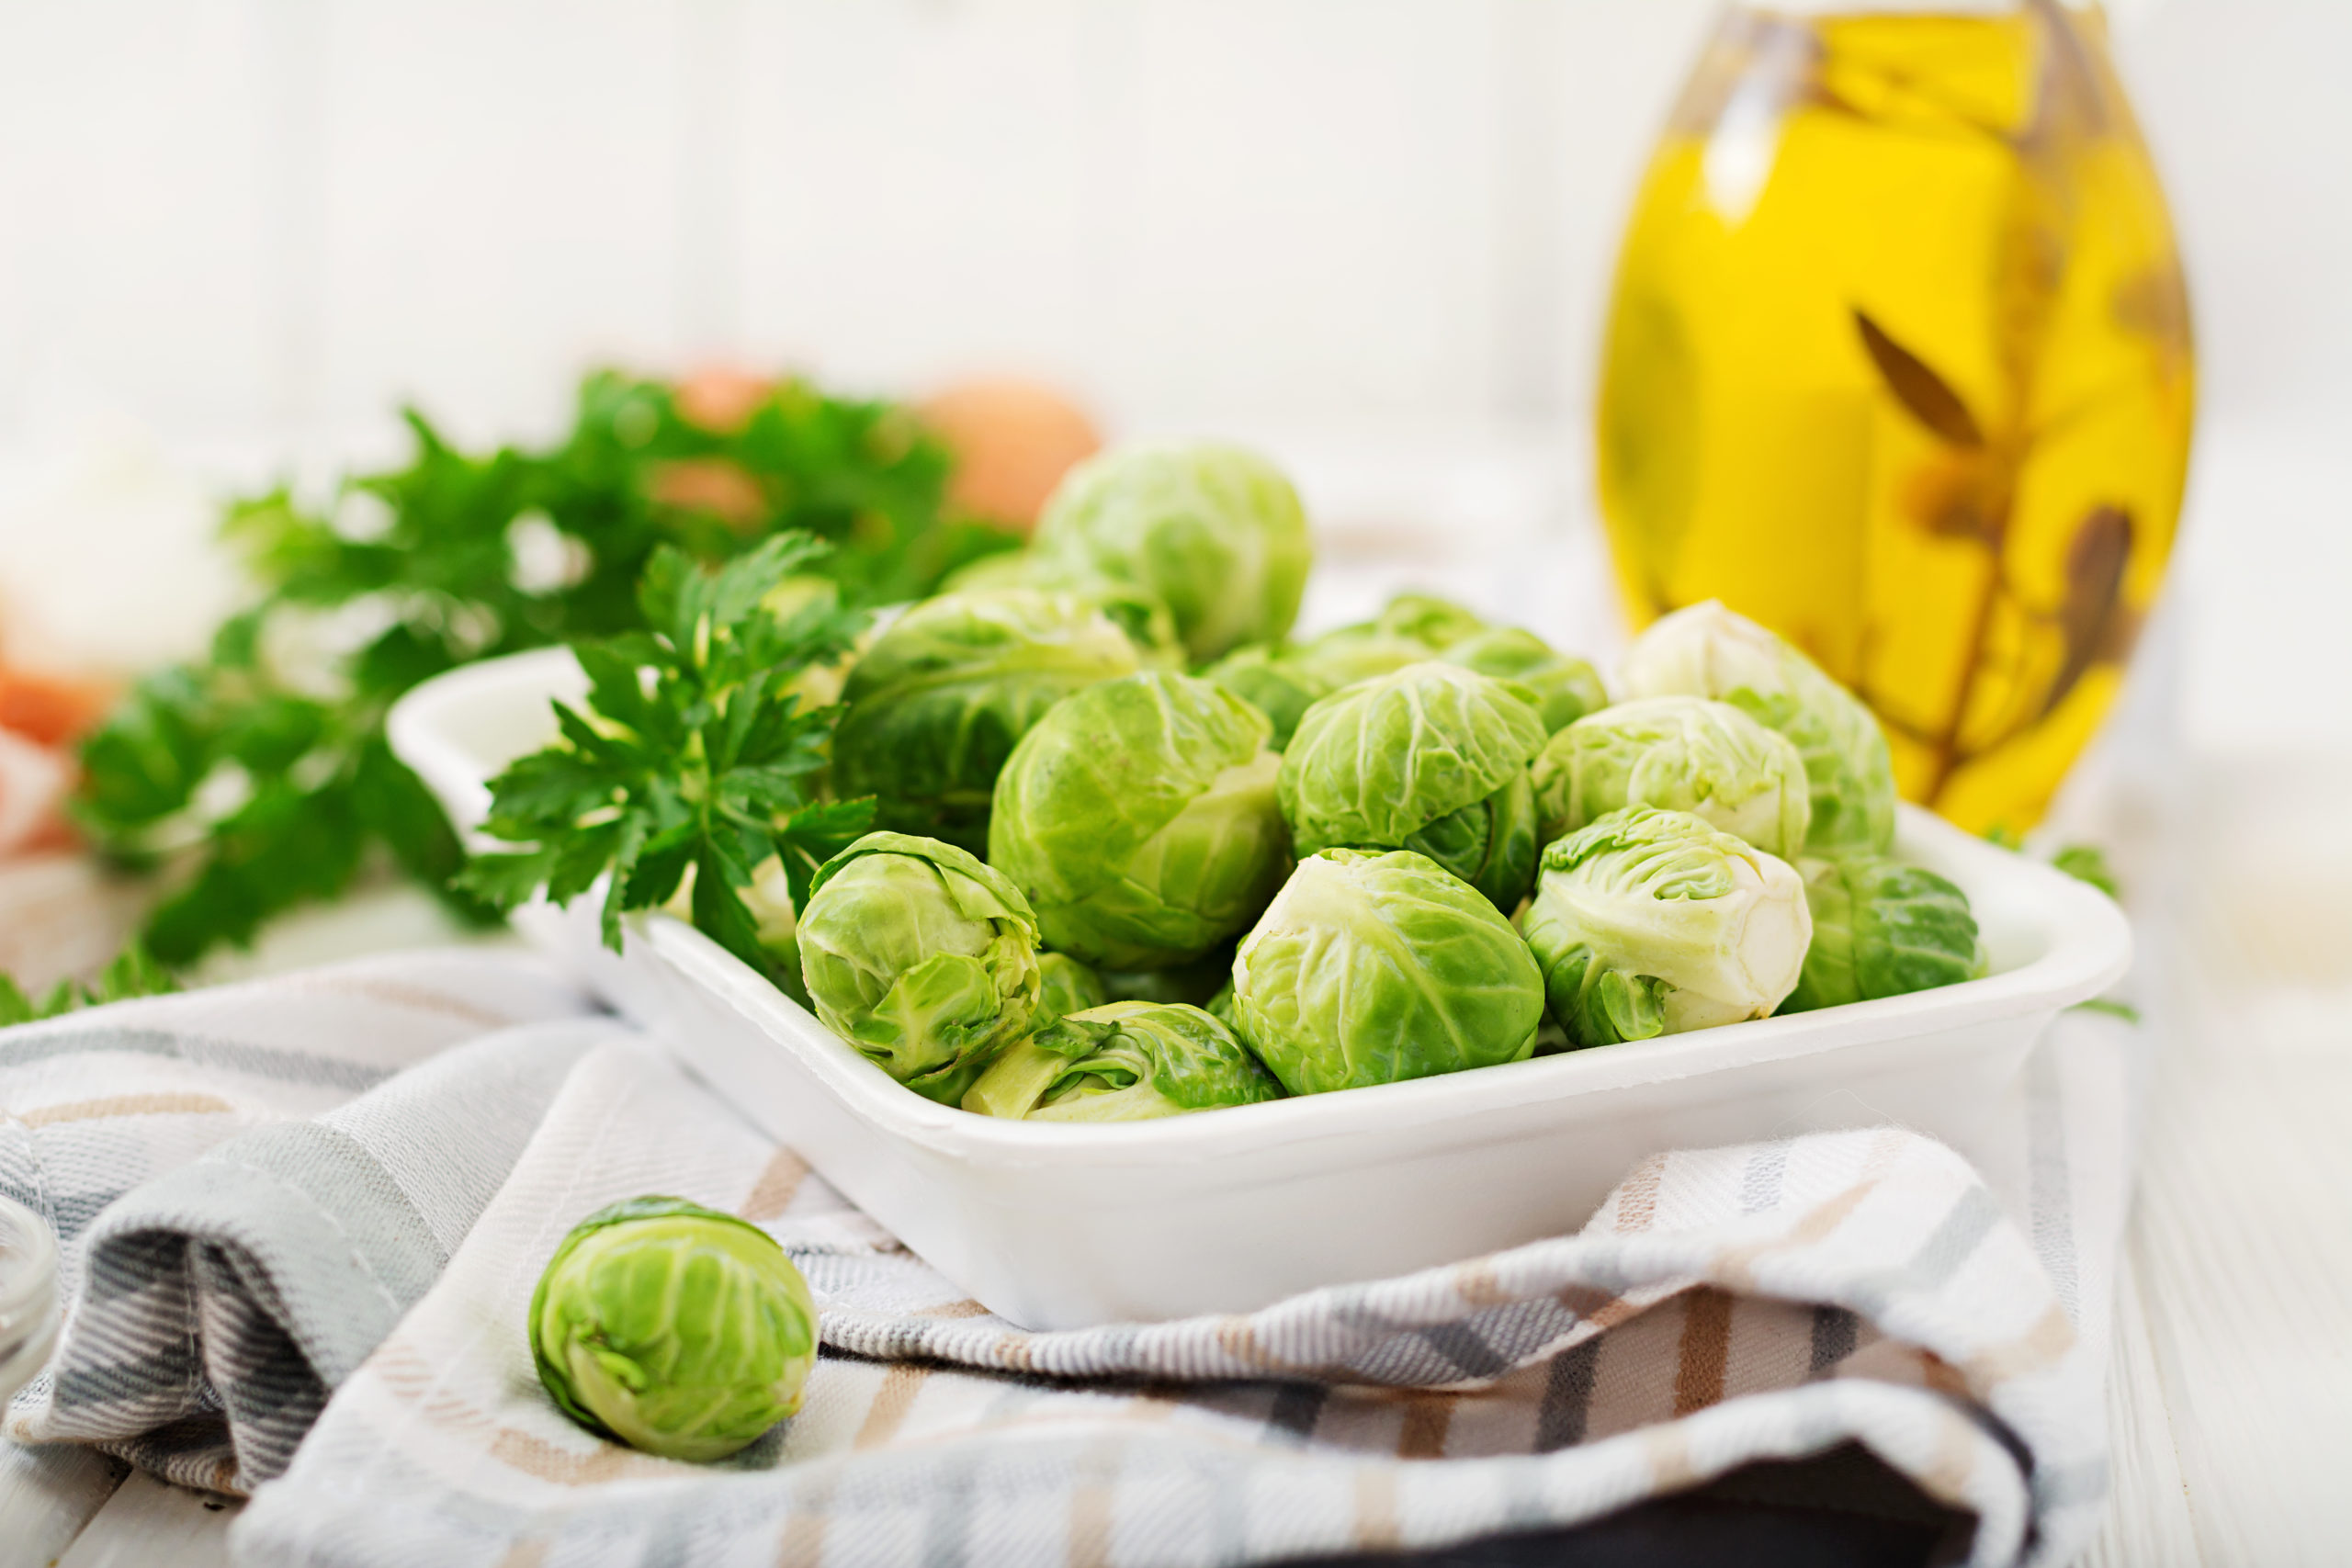 How to Cook Fresh Brussels Sprouts